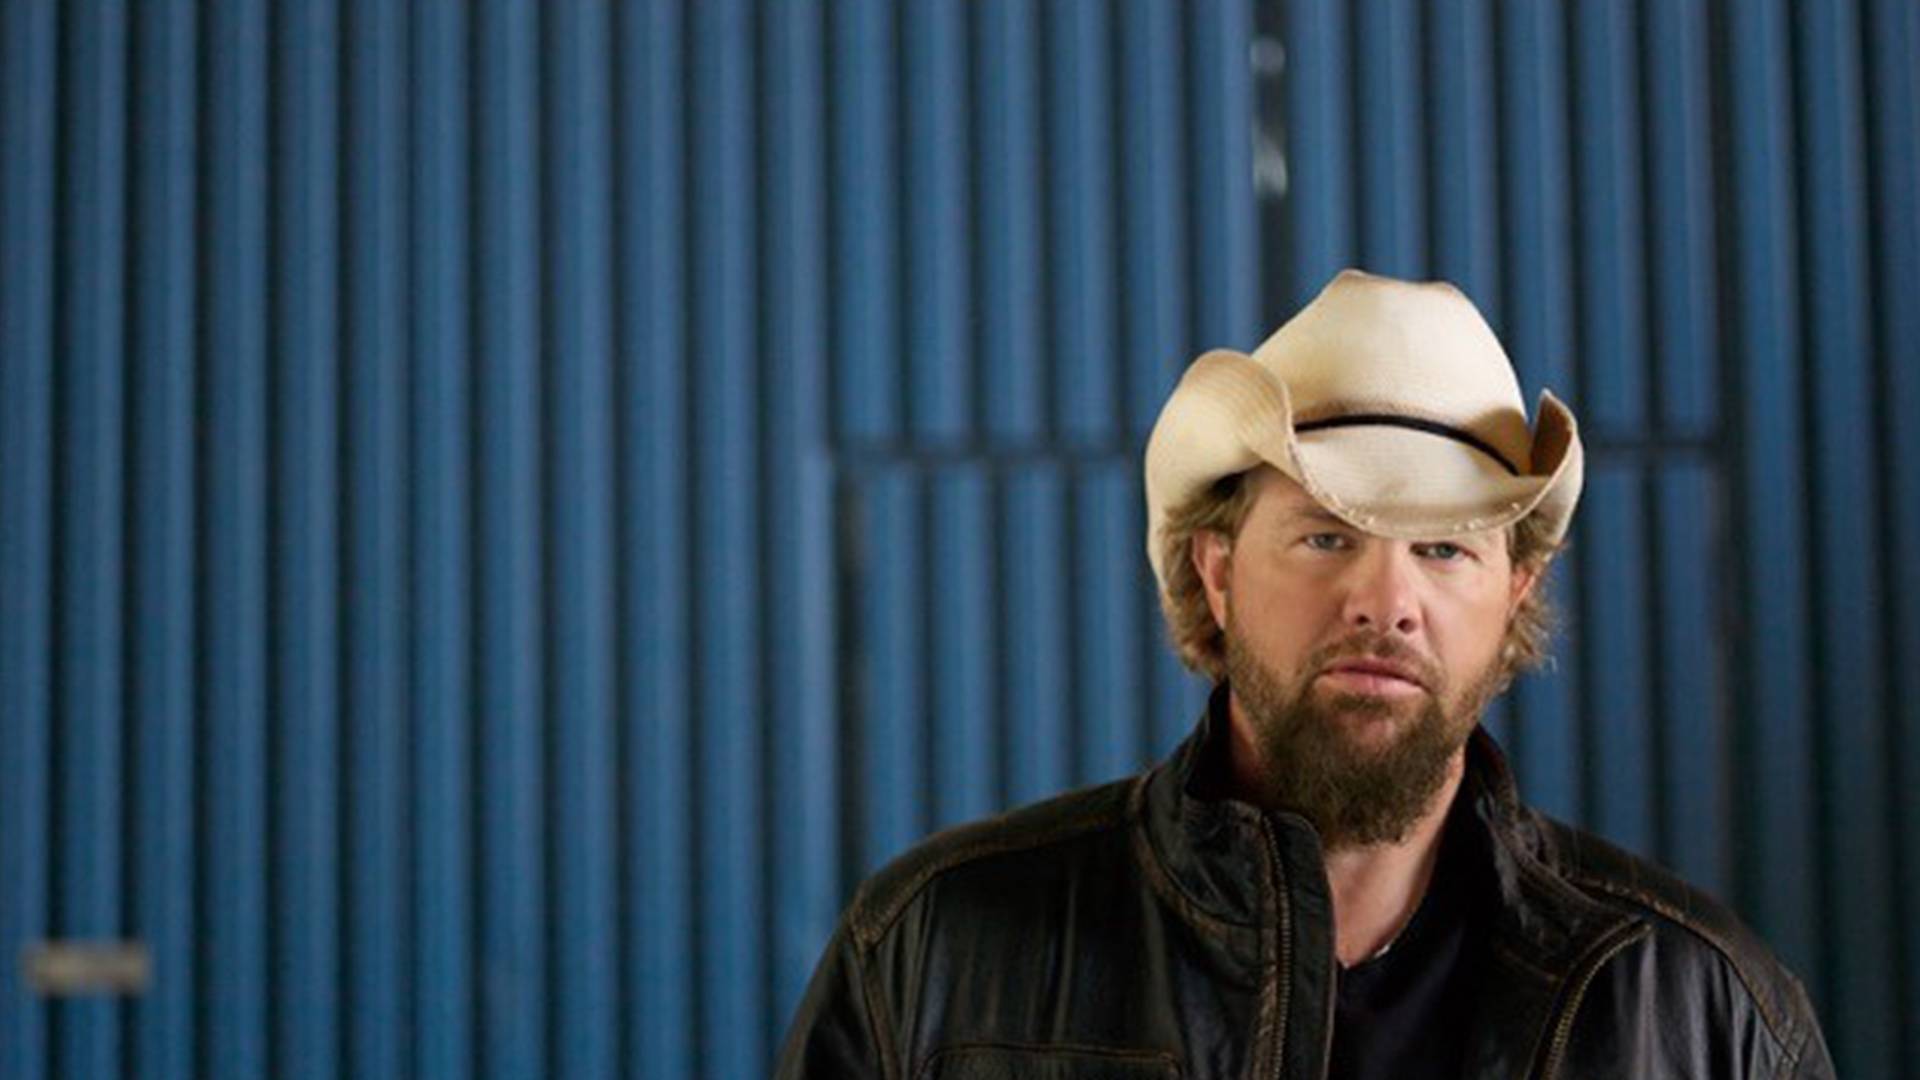 Toby Keith "Should've Been a Cowboy" (Live XXV) CMT Music Videos